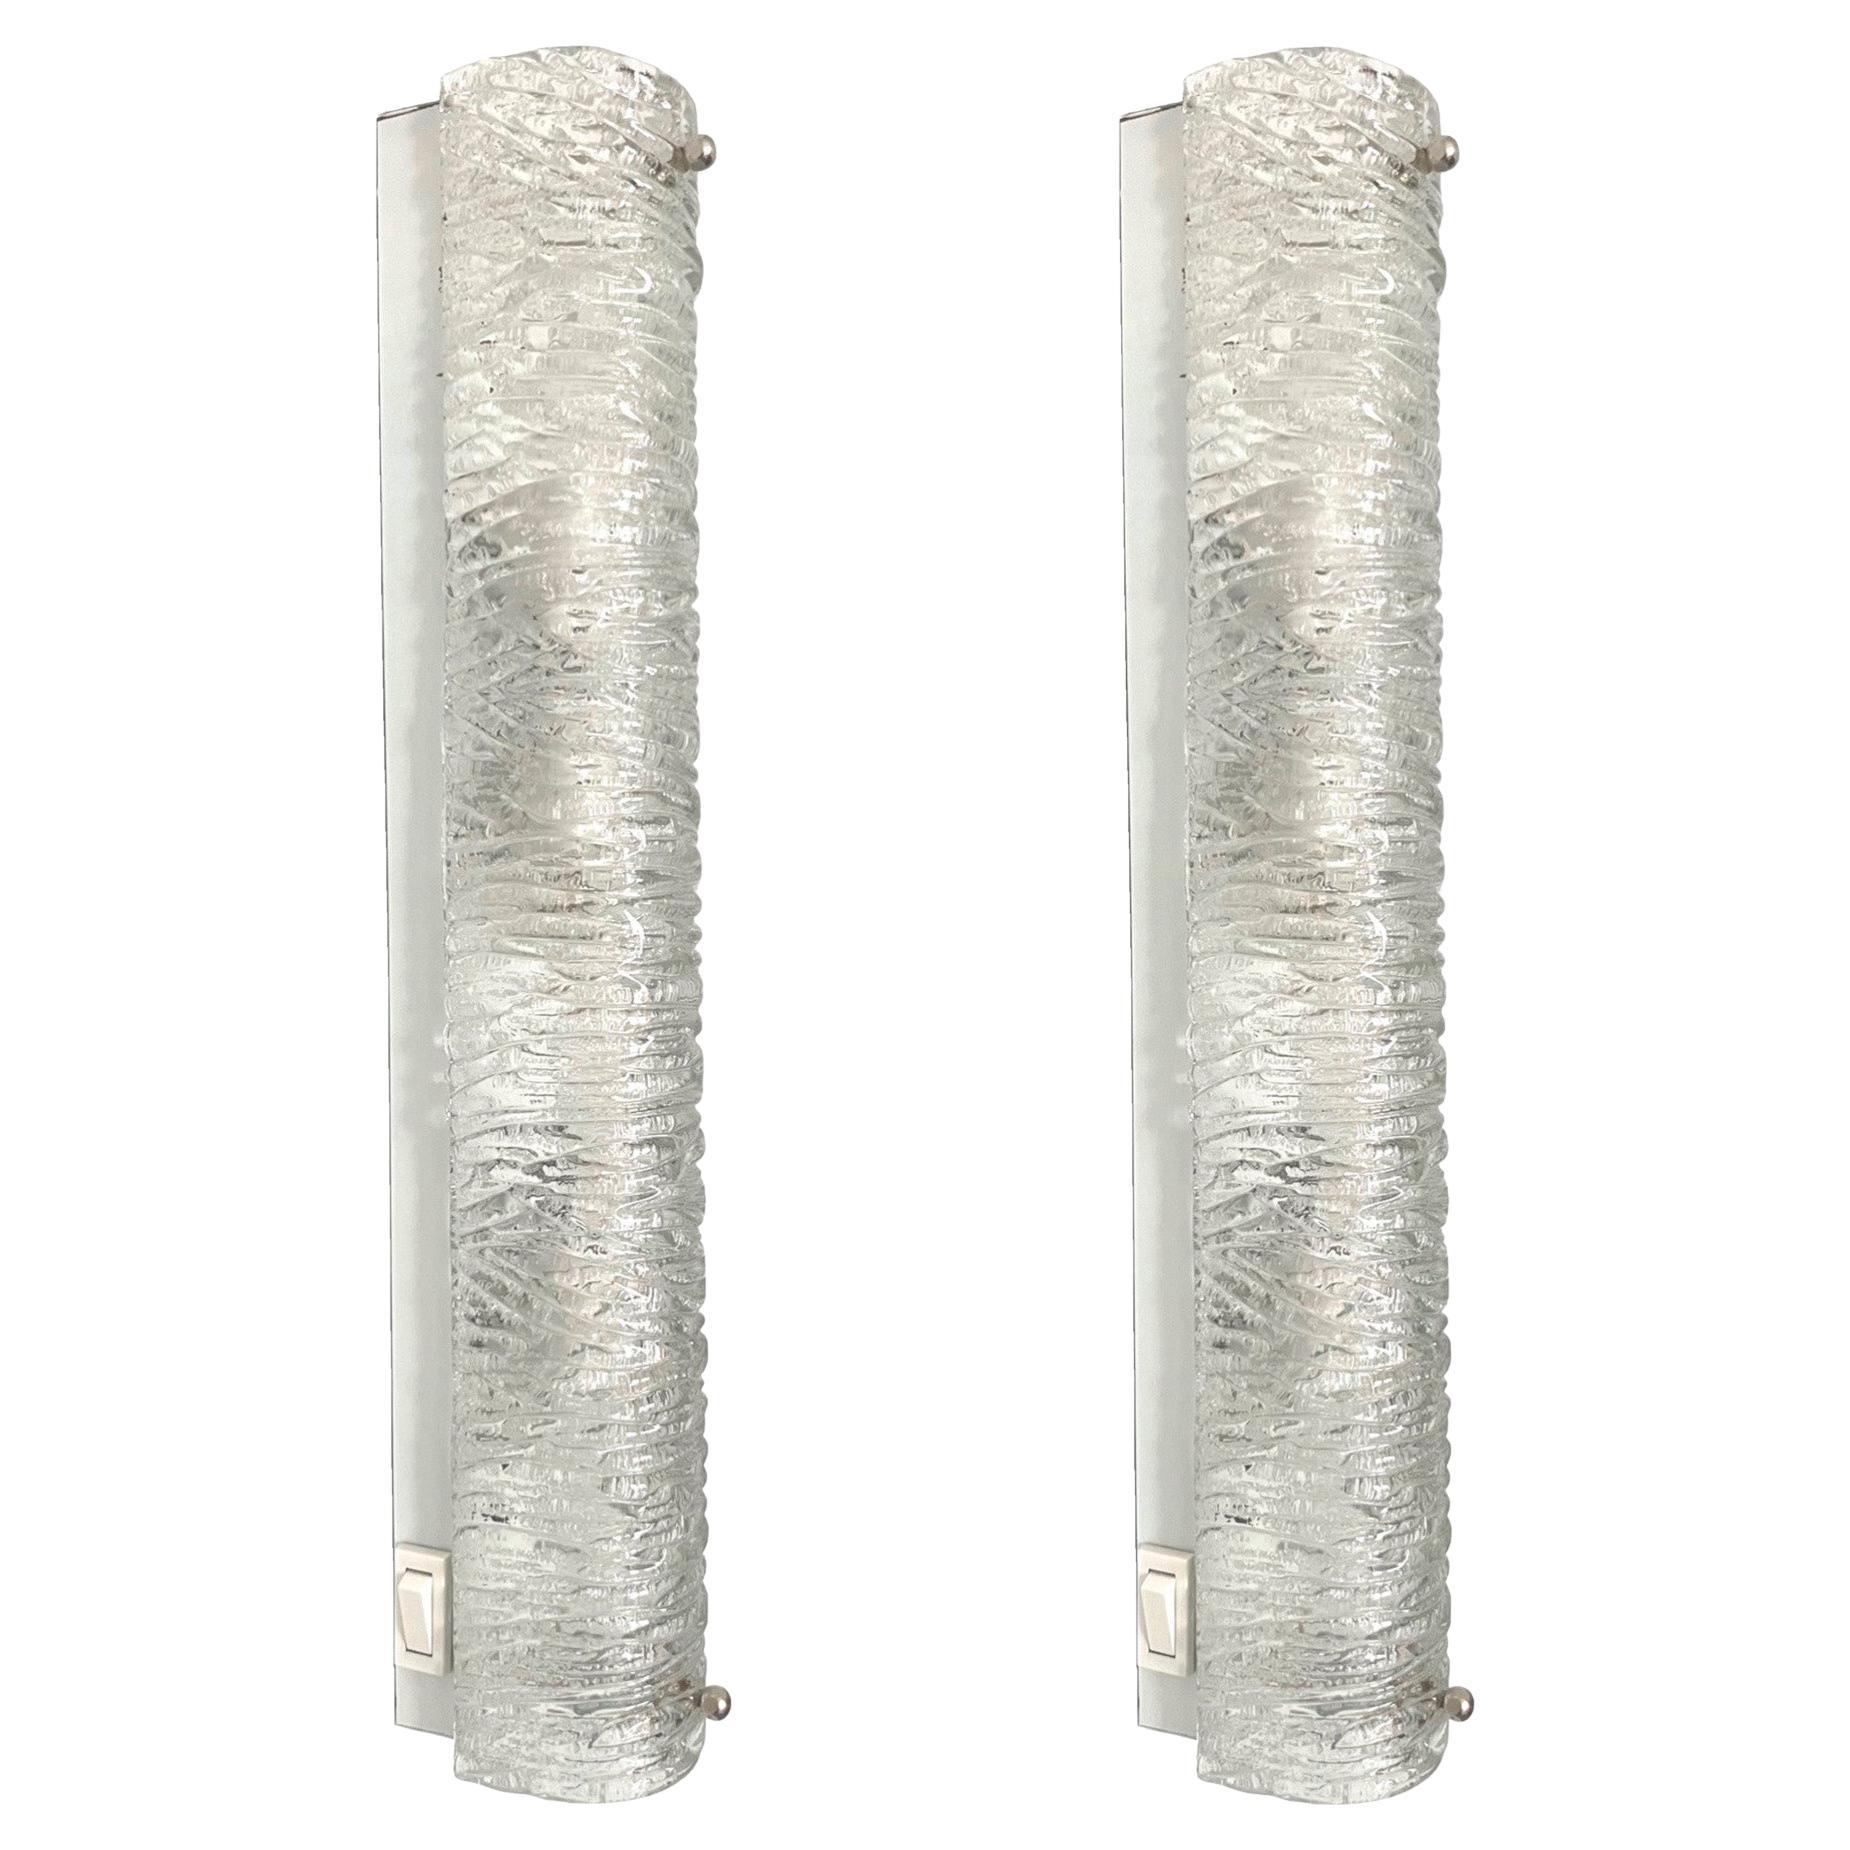 German Midcentury Pair of Murano Glass Wall Sconces by Hillebrand, 1970s